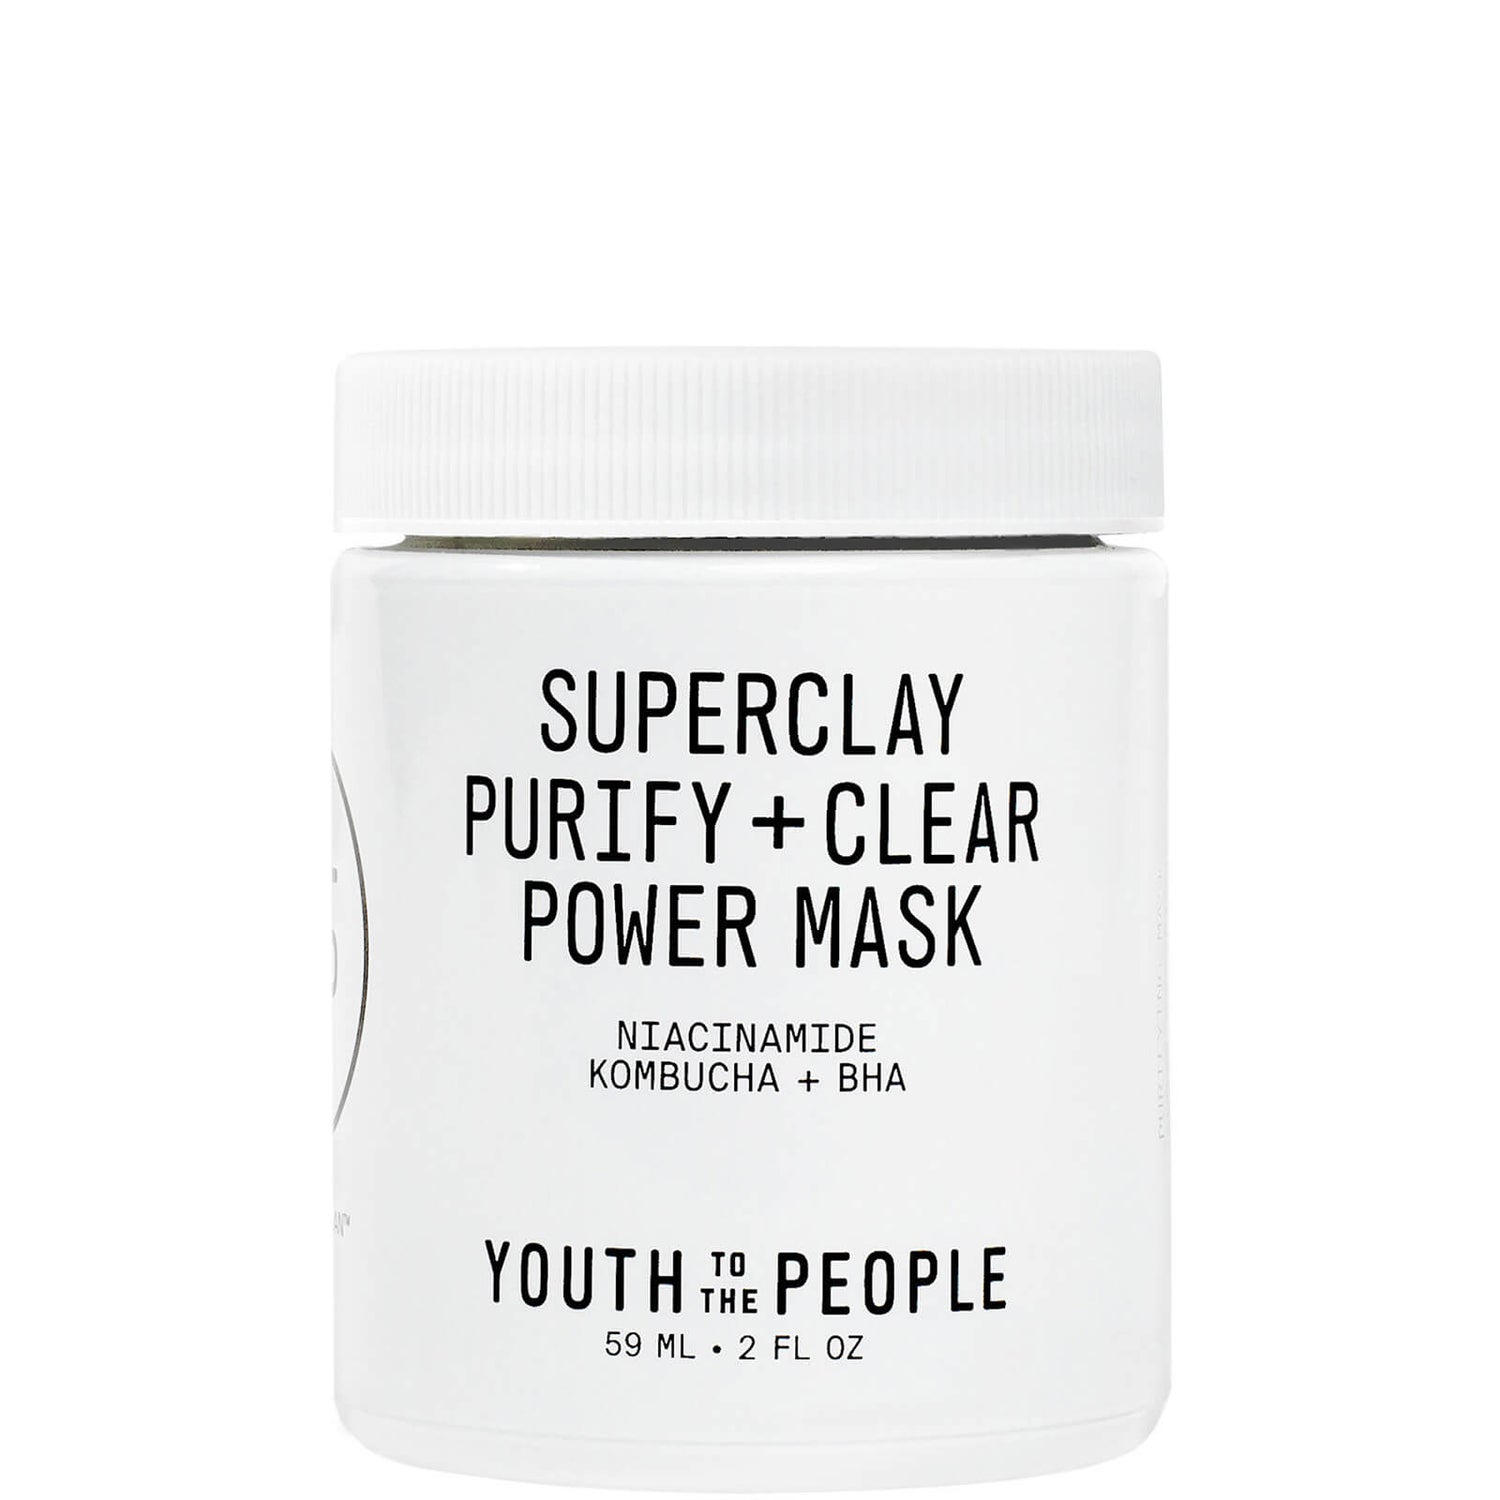 Youth To The People Superclay Purify + Clear Power Mask